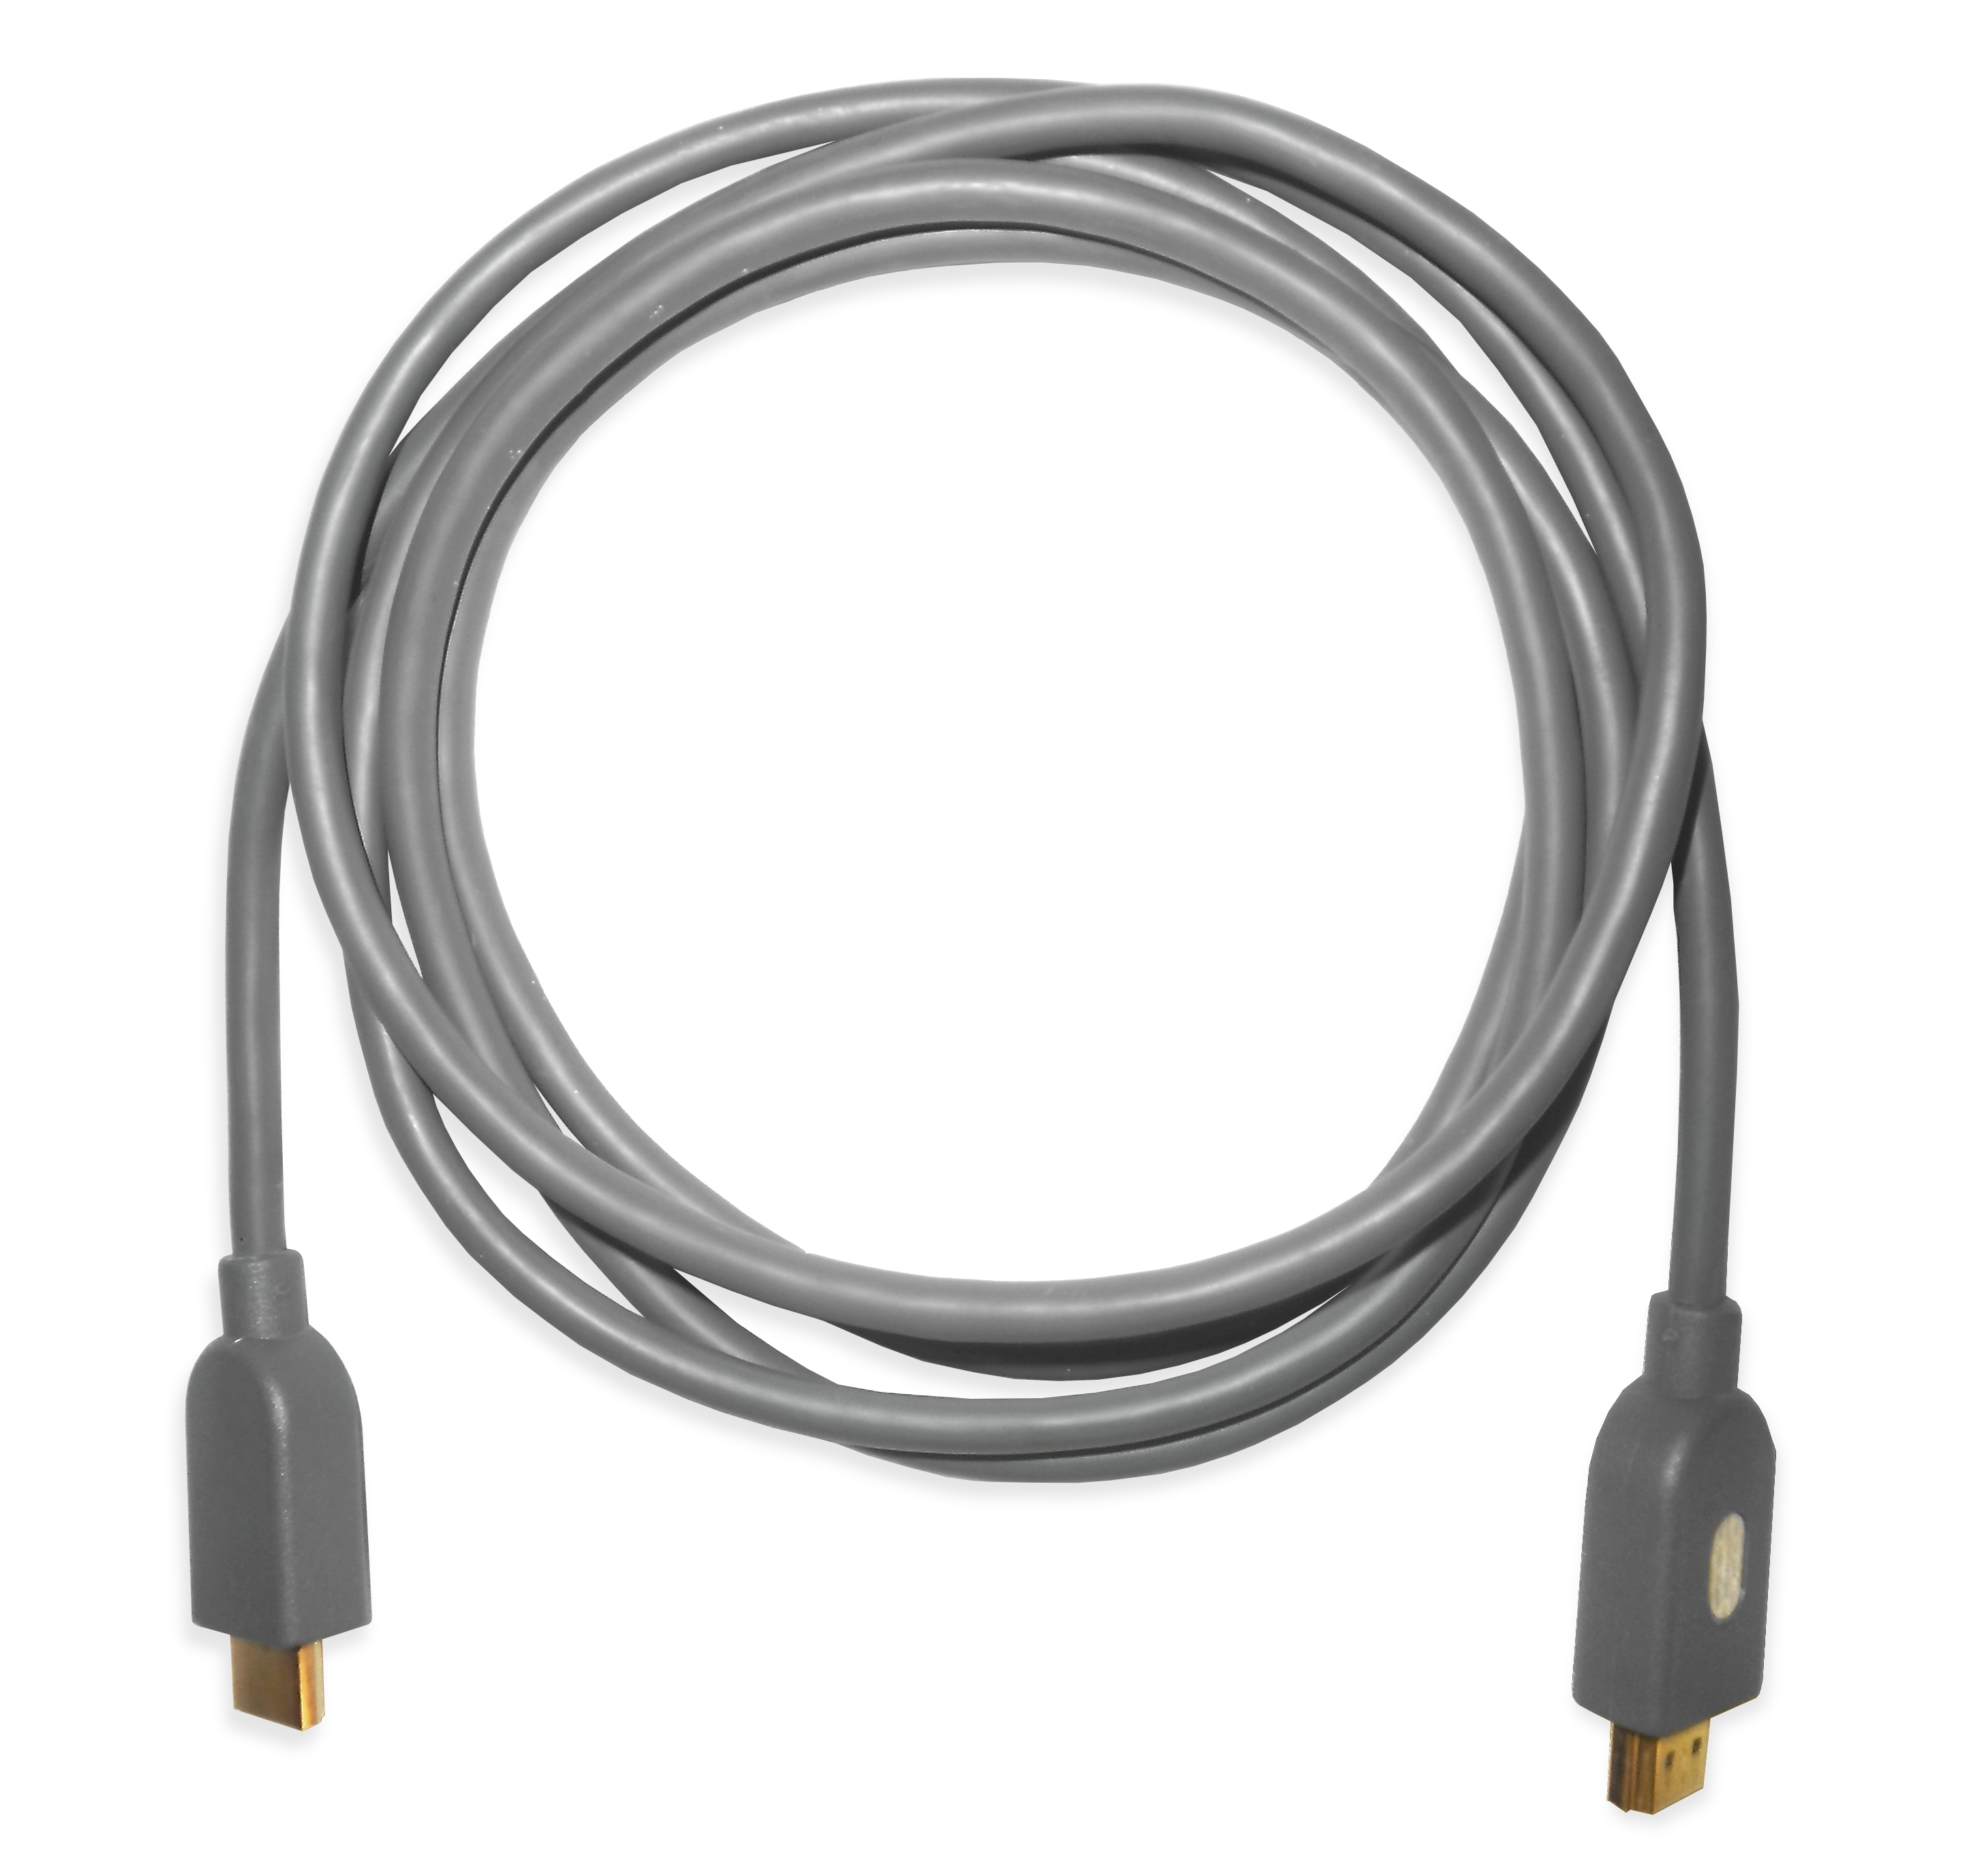 HDMI Cable PNG Transparent Images | PNG All